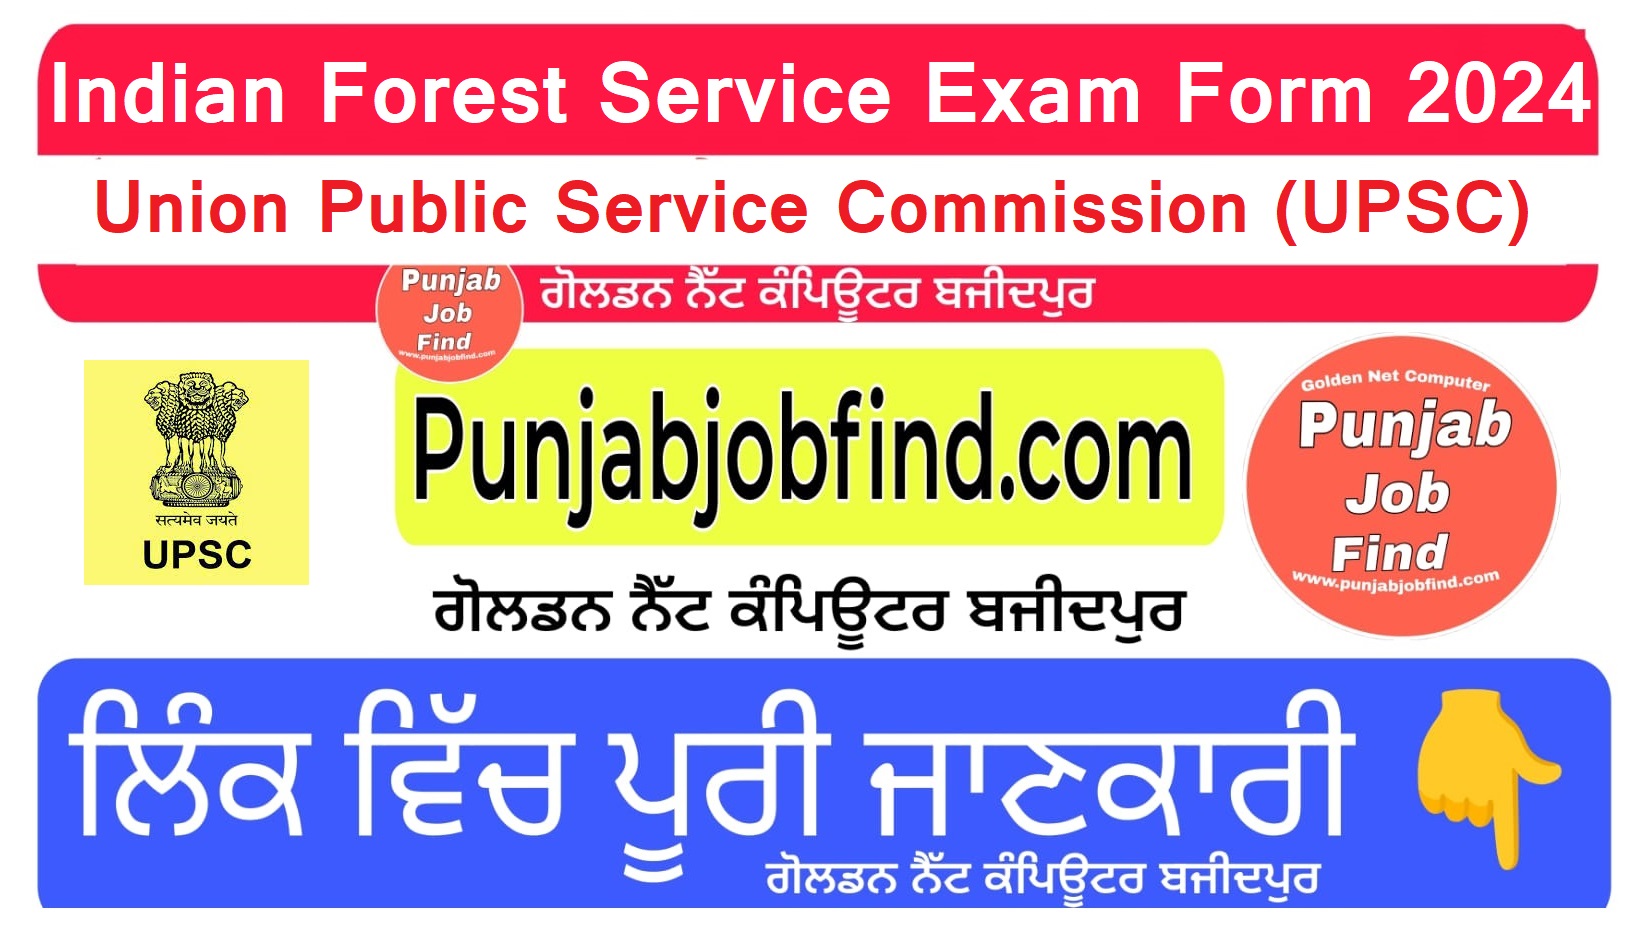 UPSC Indian Forest Service Exam Form 2024